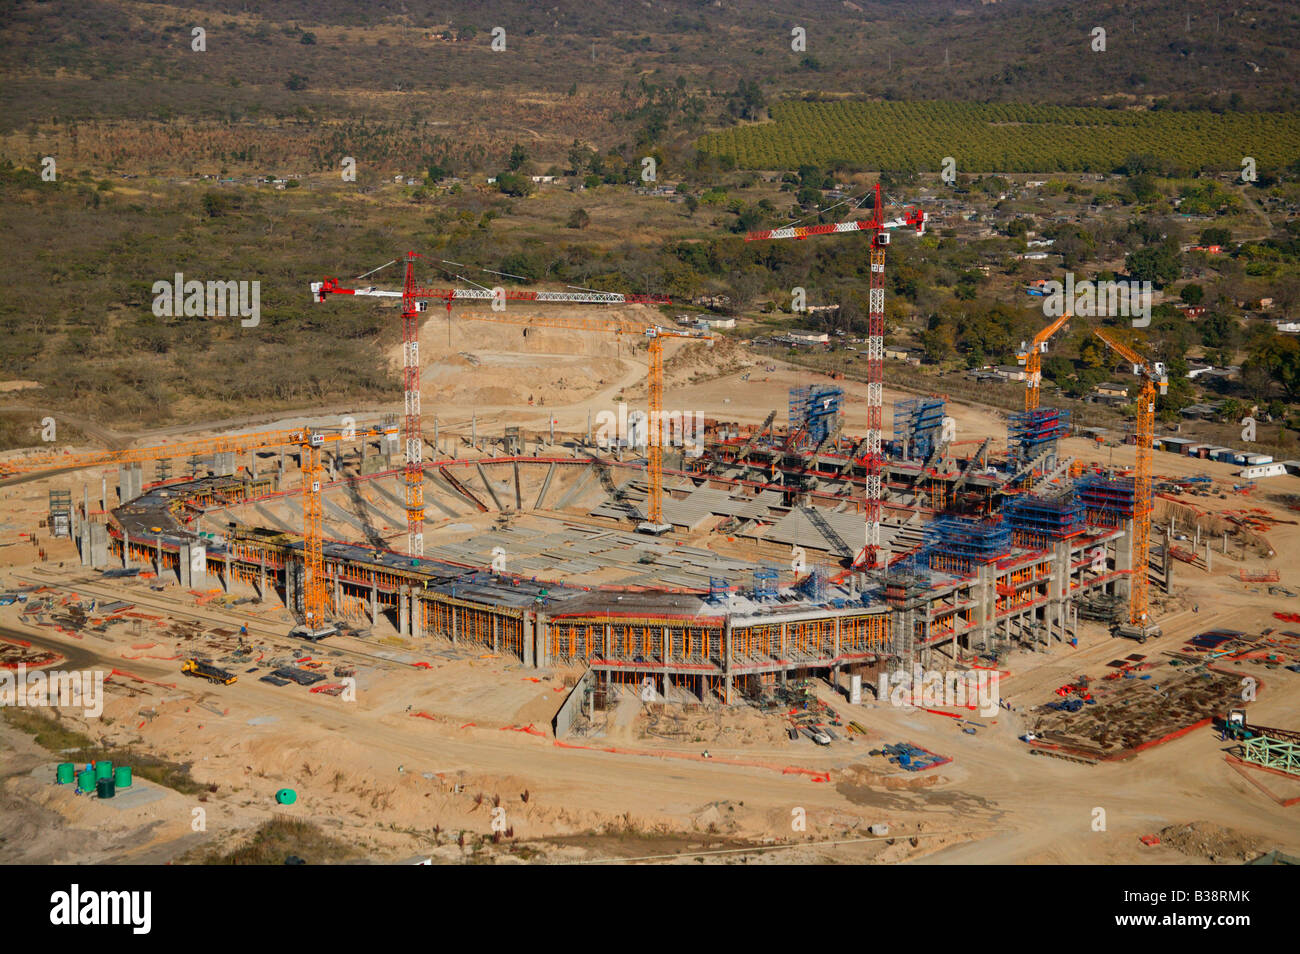 Aerial view of the Mbombela 2010 Soccer world cup stadium during construction in Nelspruit Stock Photo